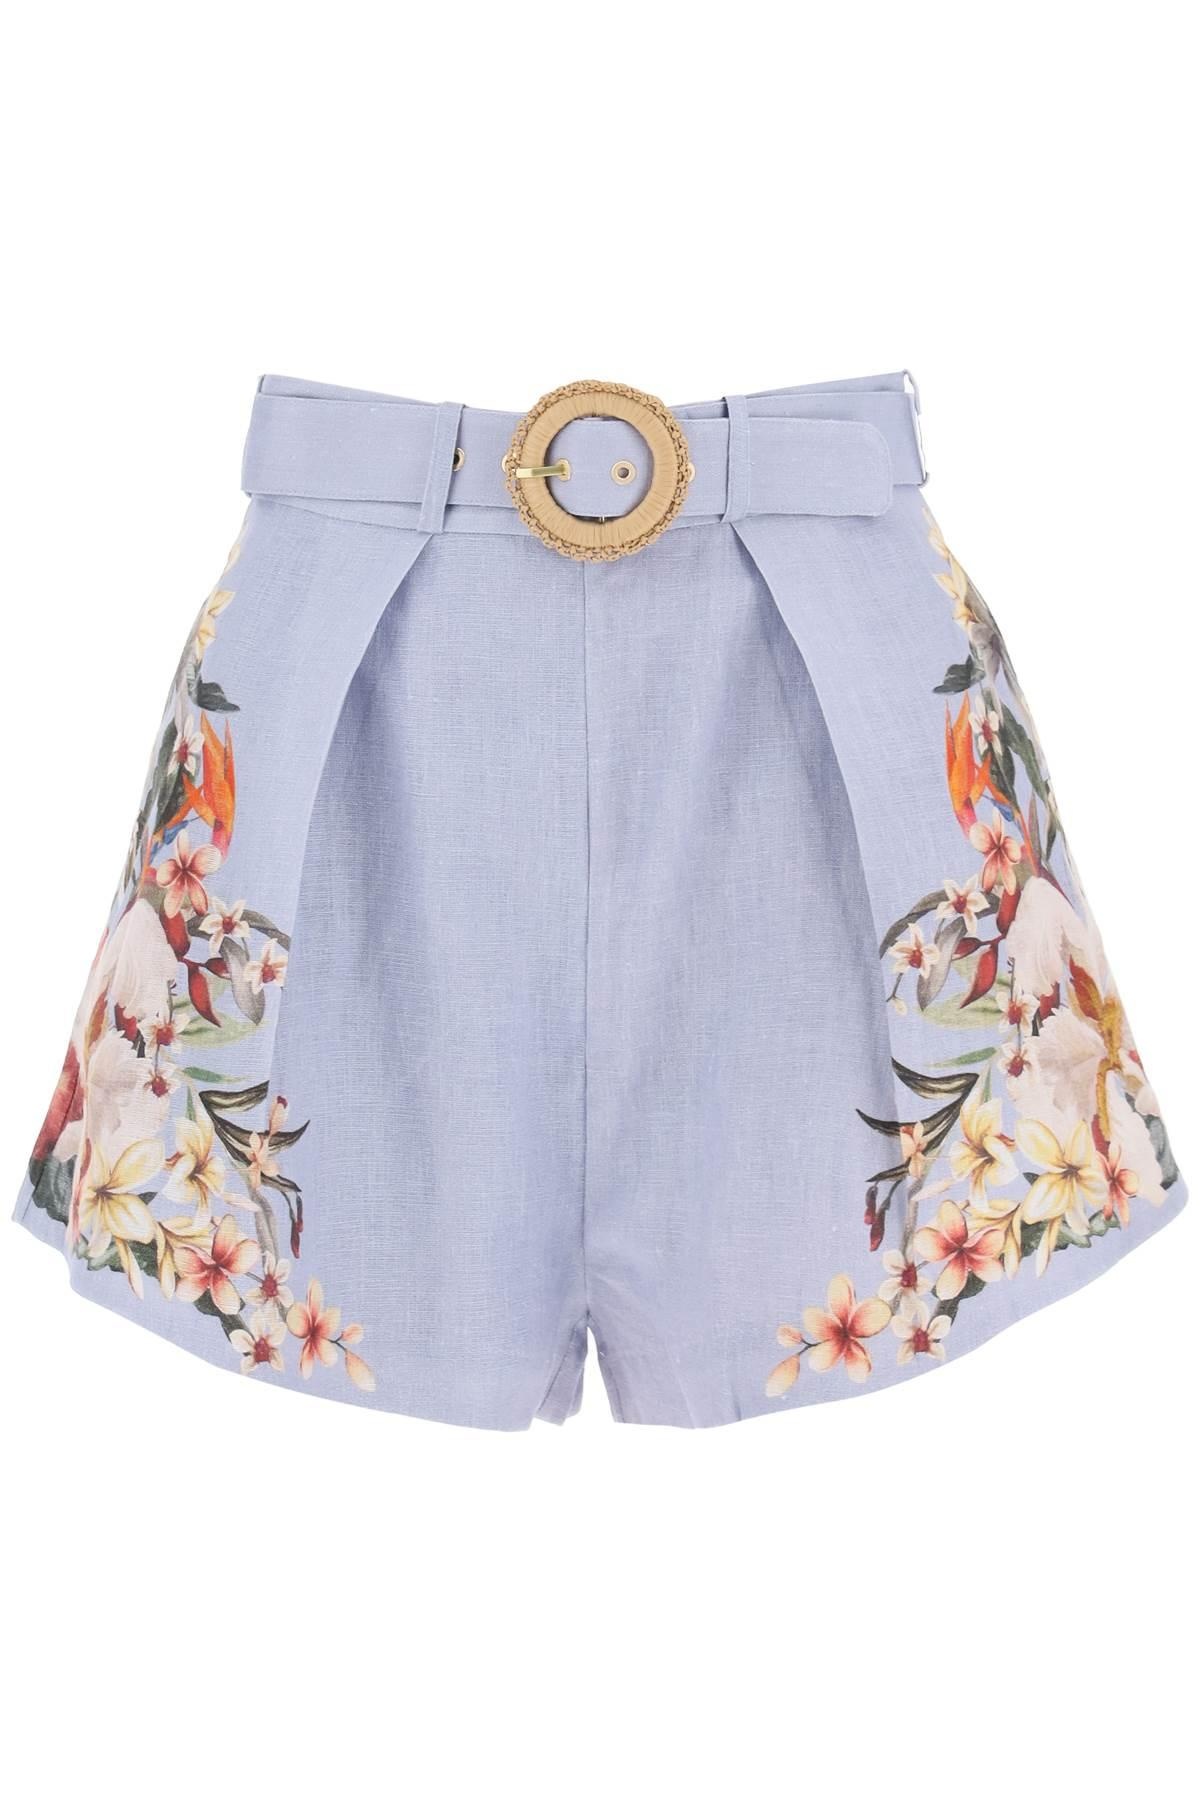 LEXI TUCK LINEN SHORTS WITH FLORAL MOTIF - 1